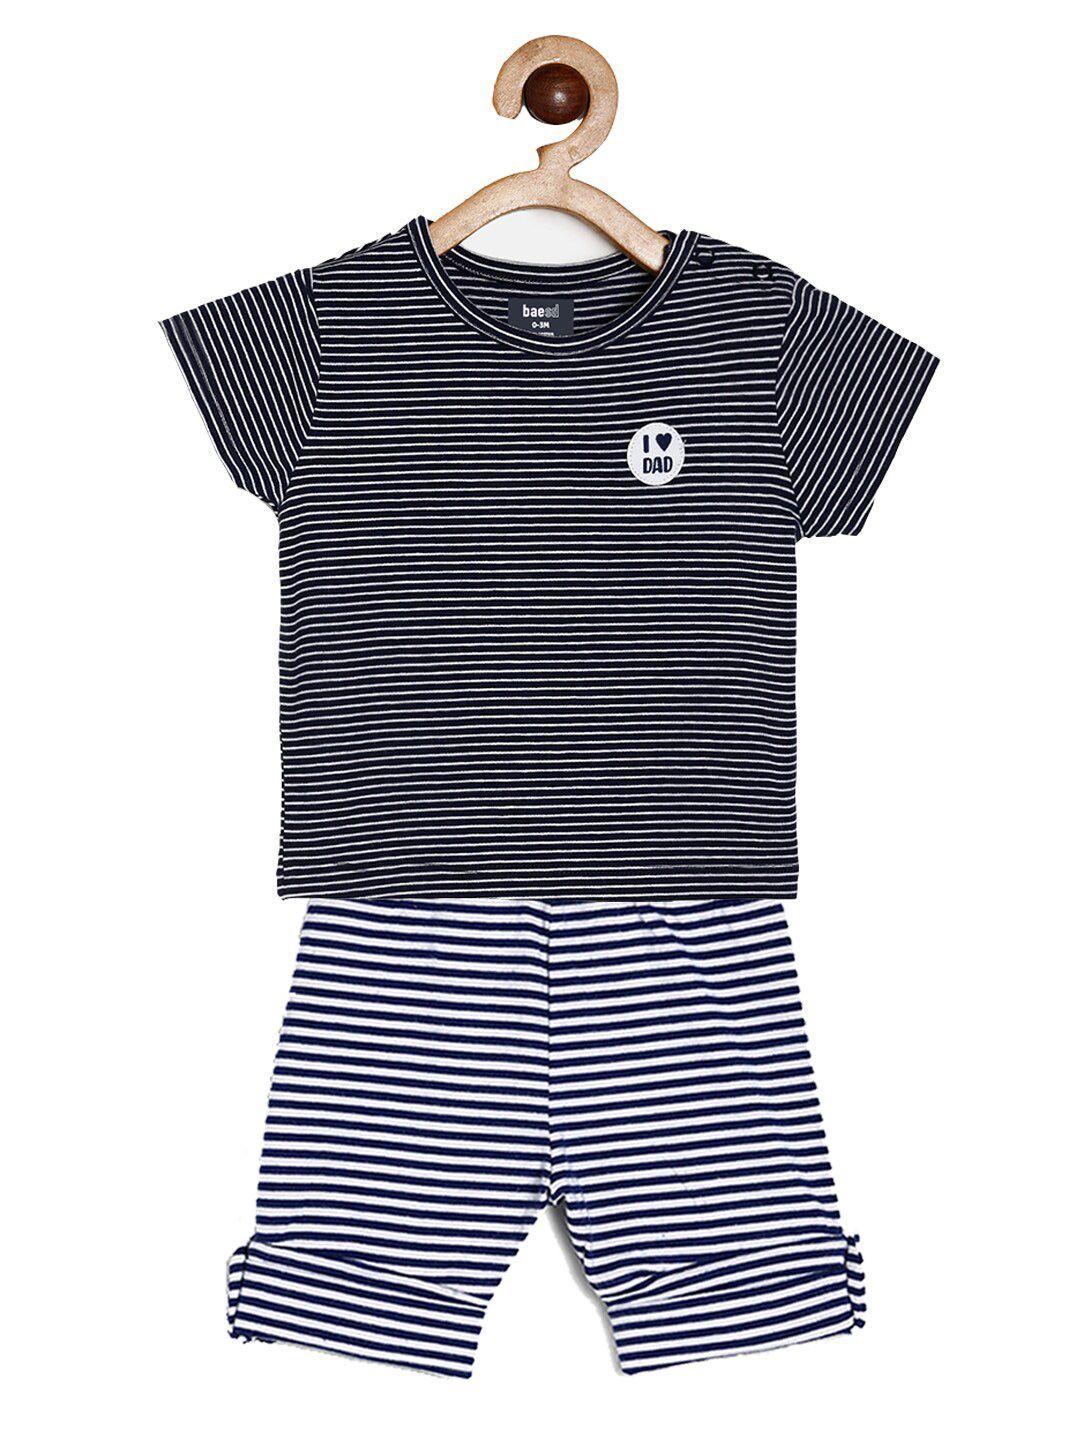 baesd unisex kids striped t-shirt with shorts